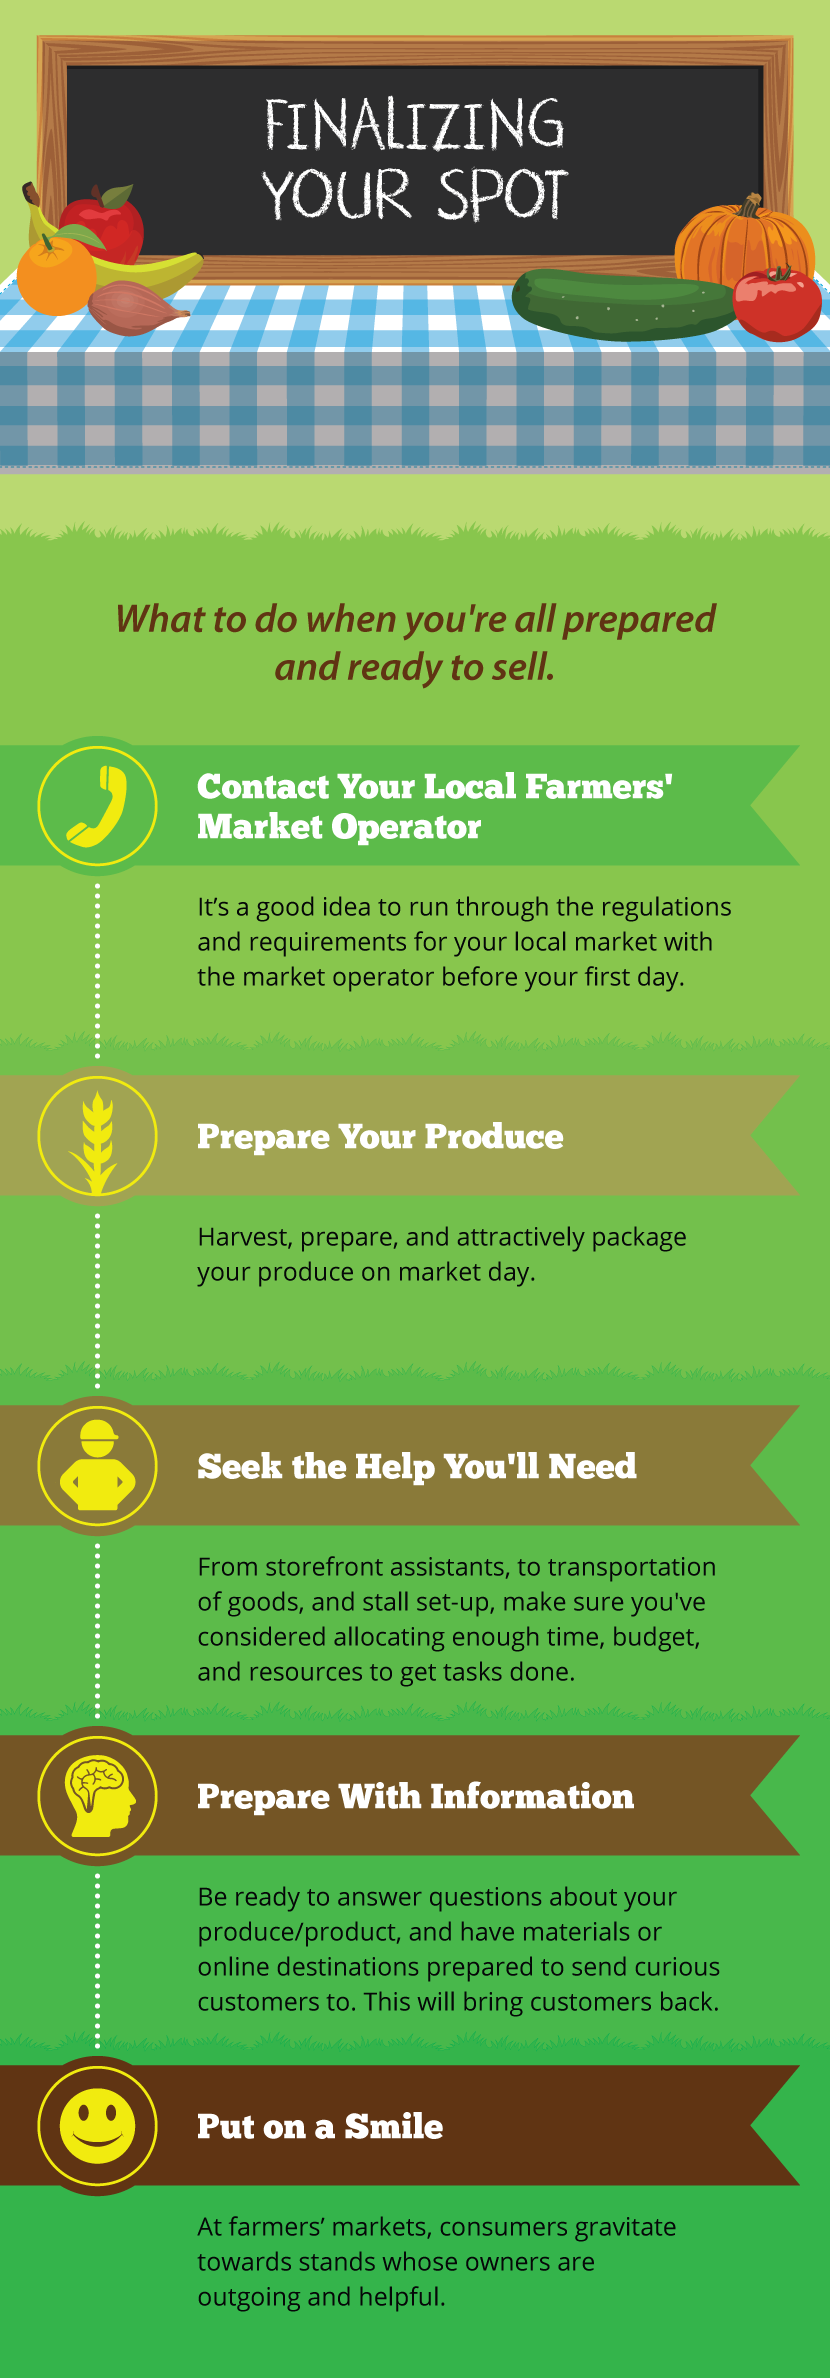 Finalizing Your Spot - To Market: Taking Your Crops to a Larger Scale